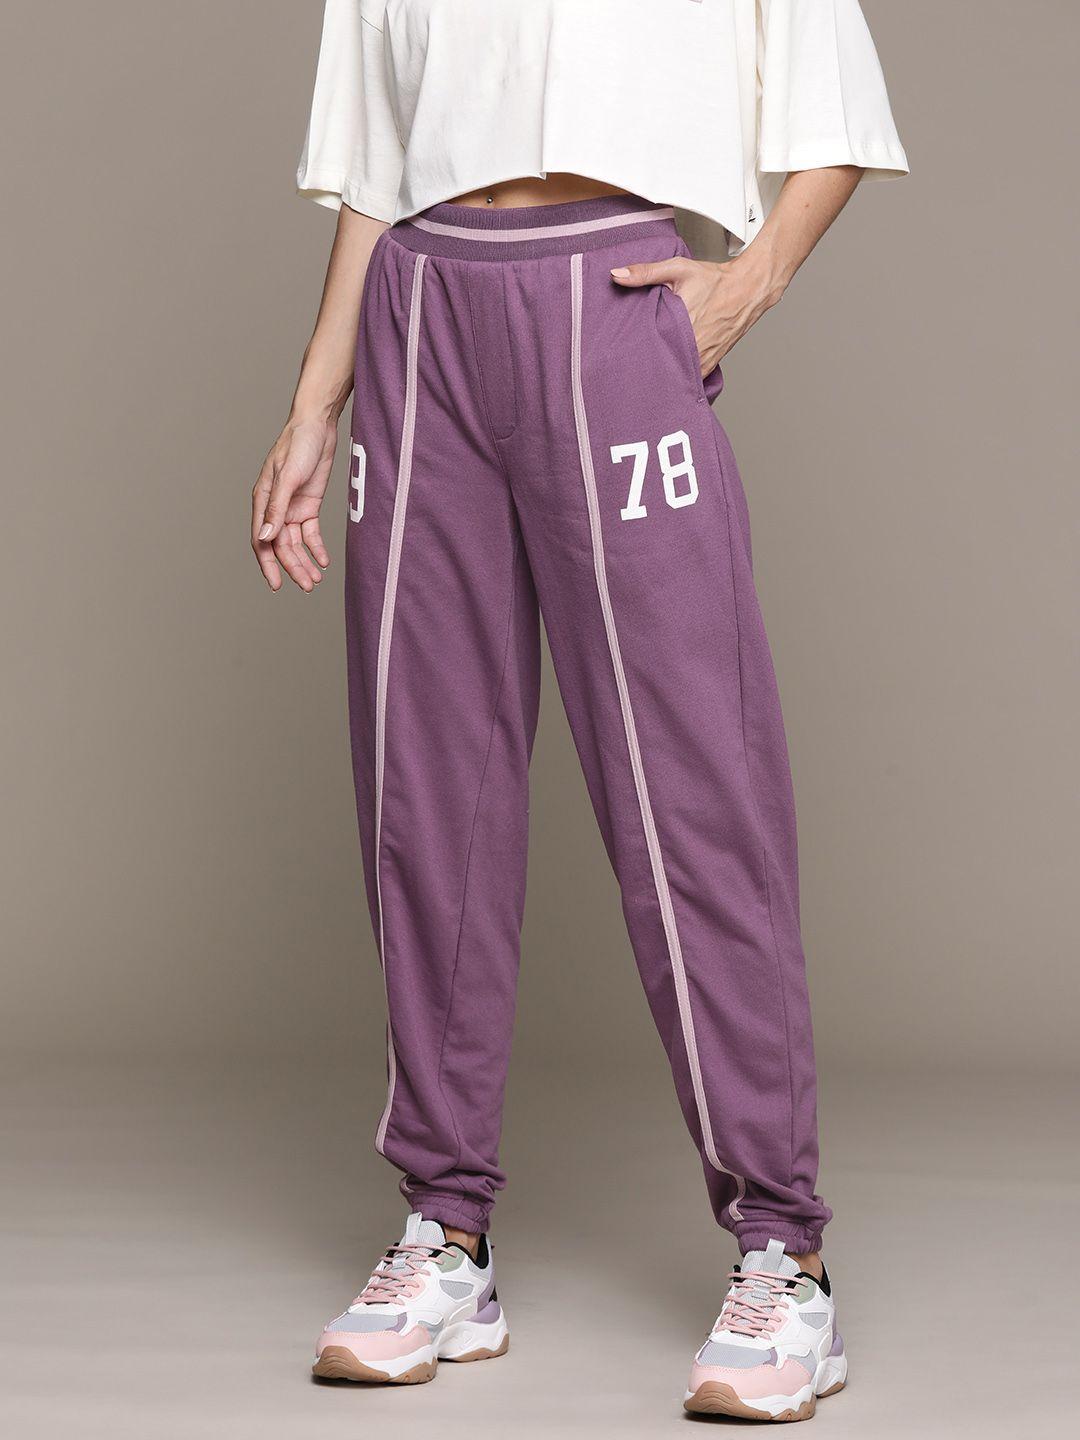 the roadster lifestyle co. x re/lax women taped joggers